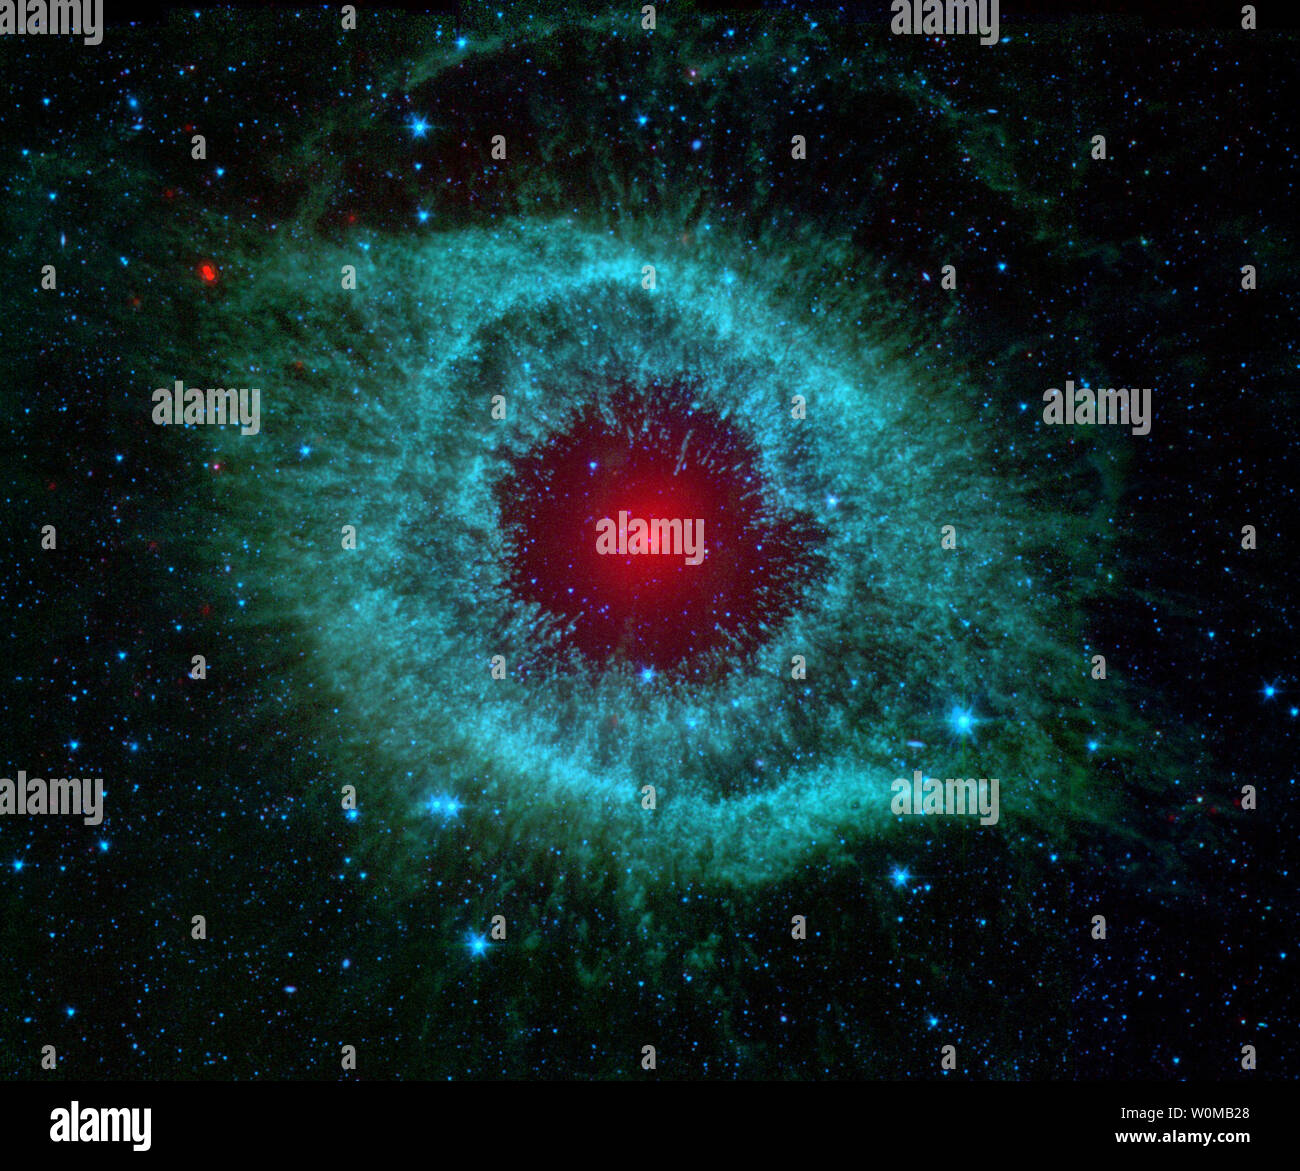 This Spitzer Space Telescope image from NASA shows infrared radiation from the Helix Nebula (NGC 7293), which is 700 light-years away in the constellation Aquarius on July 24, 2007. The two light-year diameter shroud of dust and gas around a central white dwarf has long been considered an excellent example of a planetary nebula, representing the final stages in the evolution of a sun-like star. (UPI Photo/NASA) Stock Photo